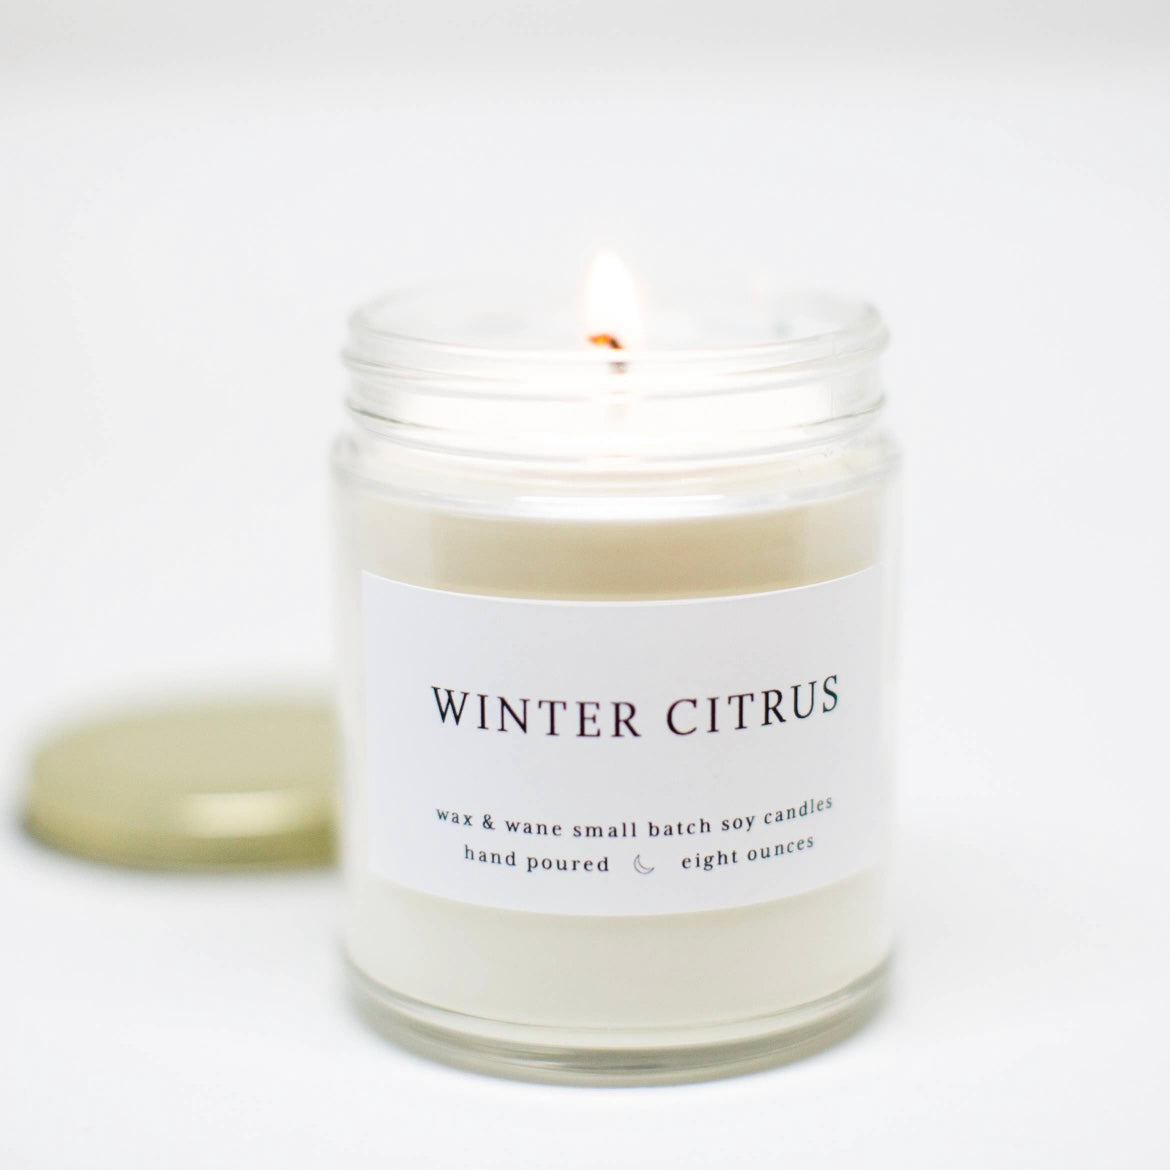 Winter Citrus Modern Soy Candle